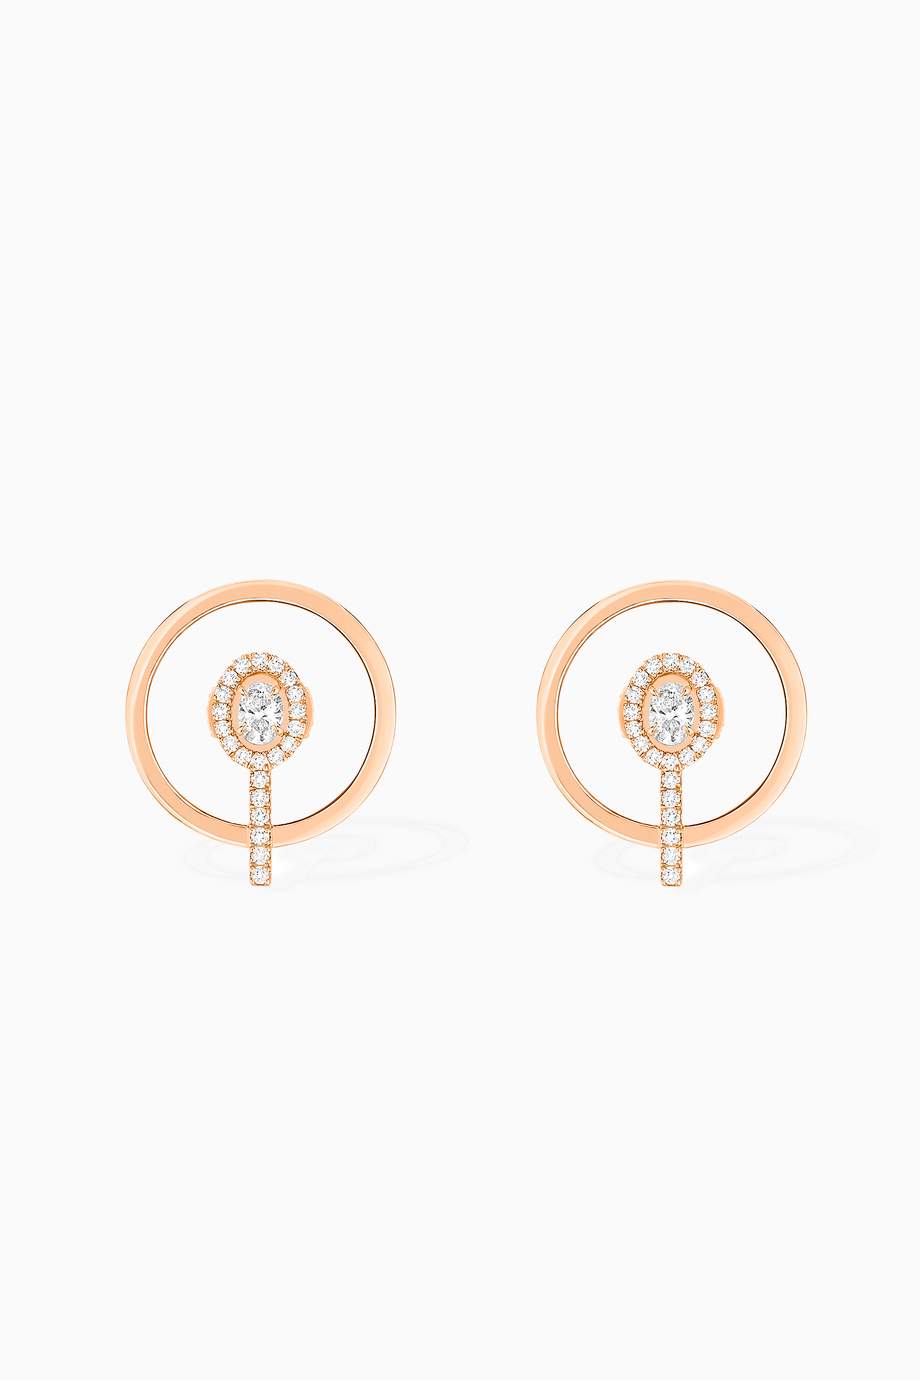 Shop Messika Gold Glam'Azone Graphic Diamond Earrings in 18kt Rose Gold ...